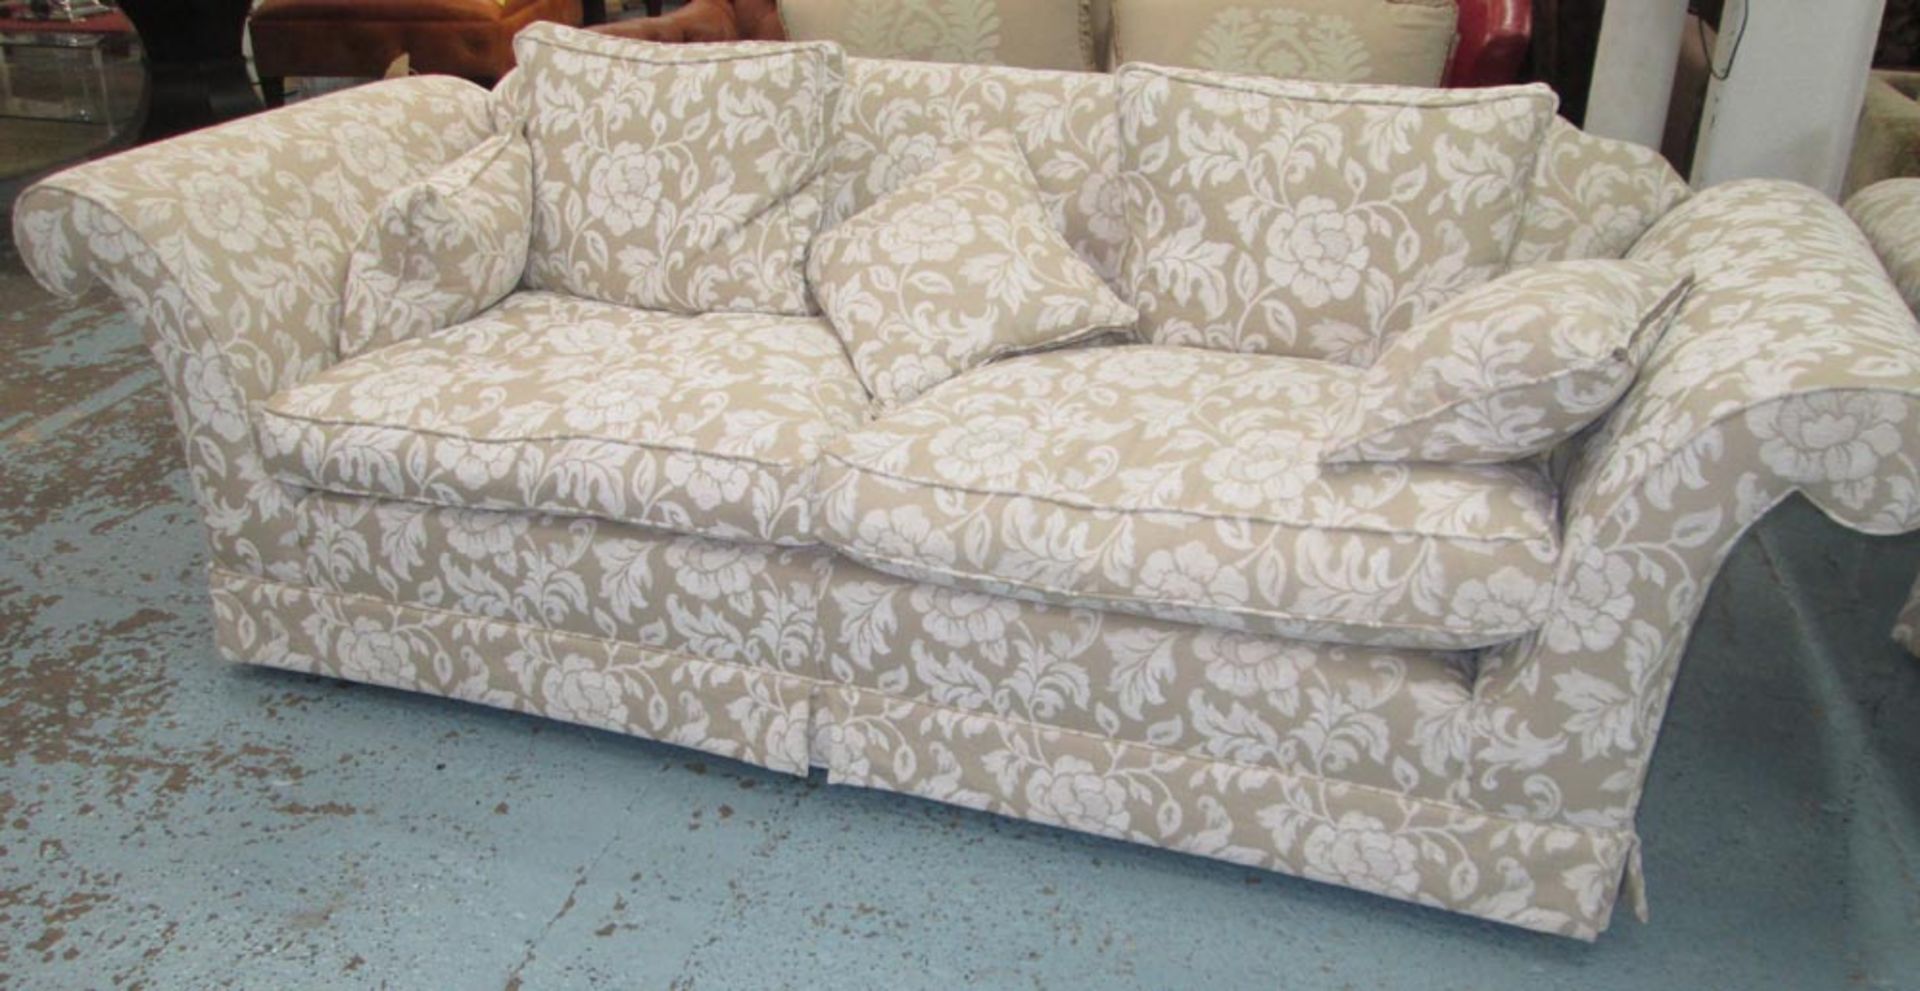 SOFA, Chesterfield style in floral pattern upholstery with scroll arms, 239cm W.